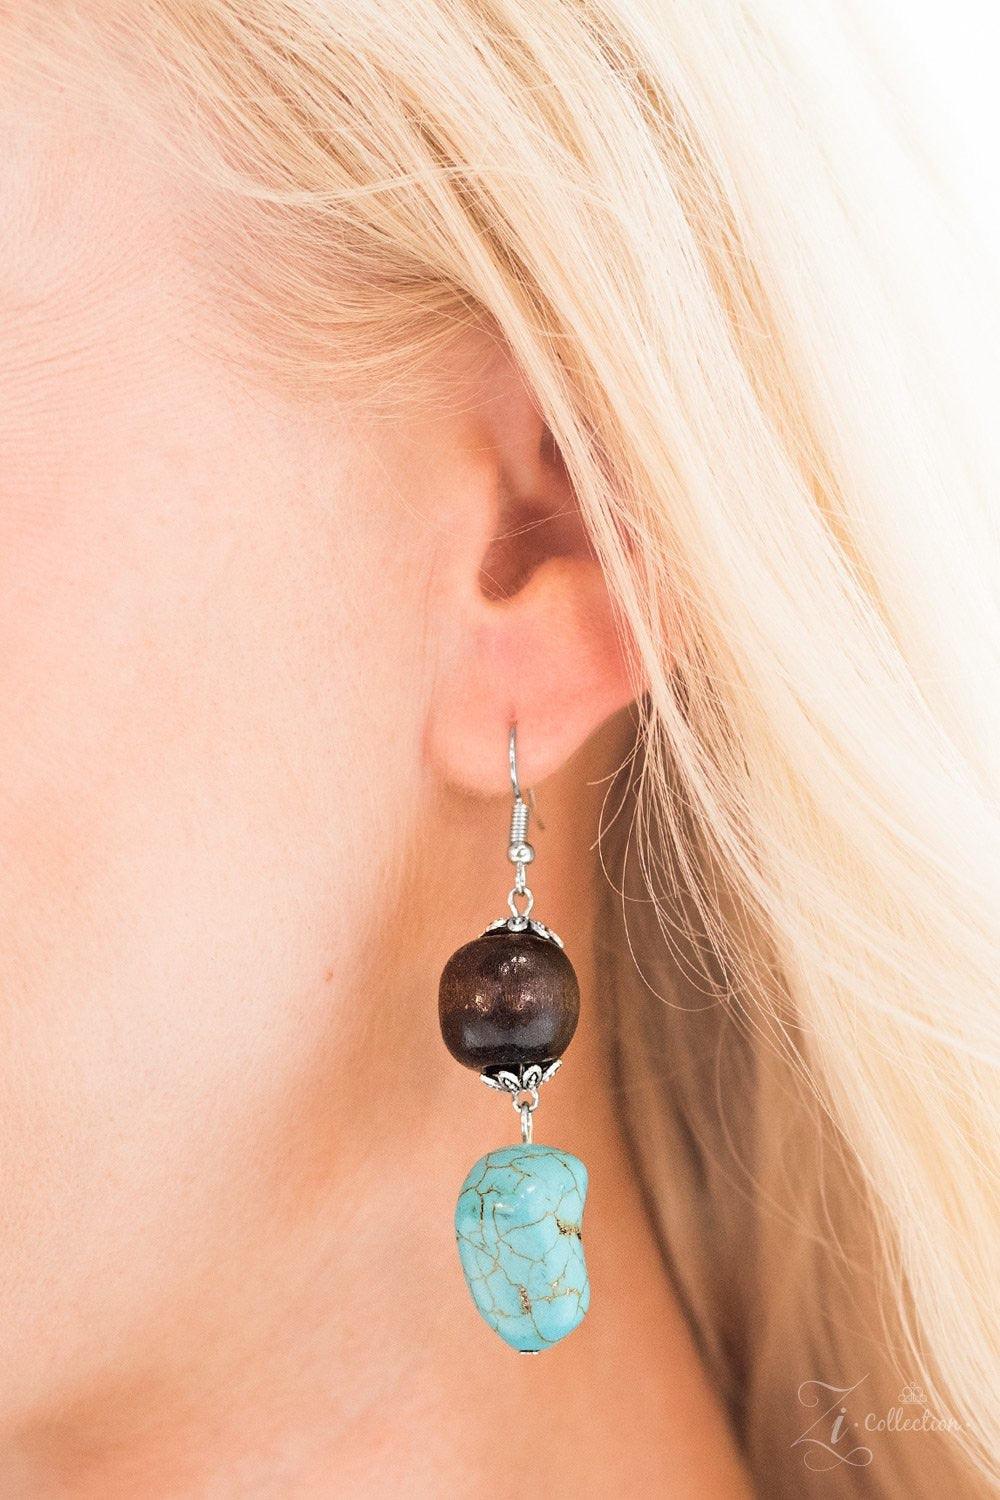 Paparazzi Accessories Groundbreaker Featuring imperfect finishes, refreshing turquoise stones trickle along three shimmery silver chains. Earthy wooden accents are added to the tranquil layers for a natural, artisanal inspired look. Features an adjustable